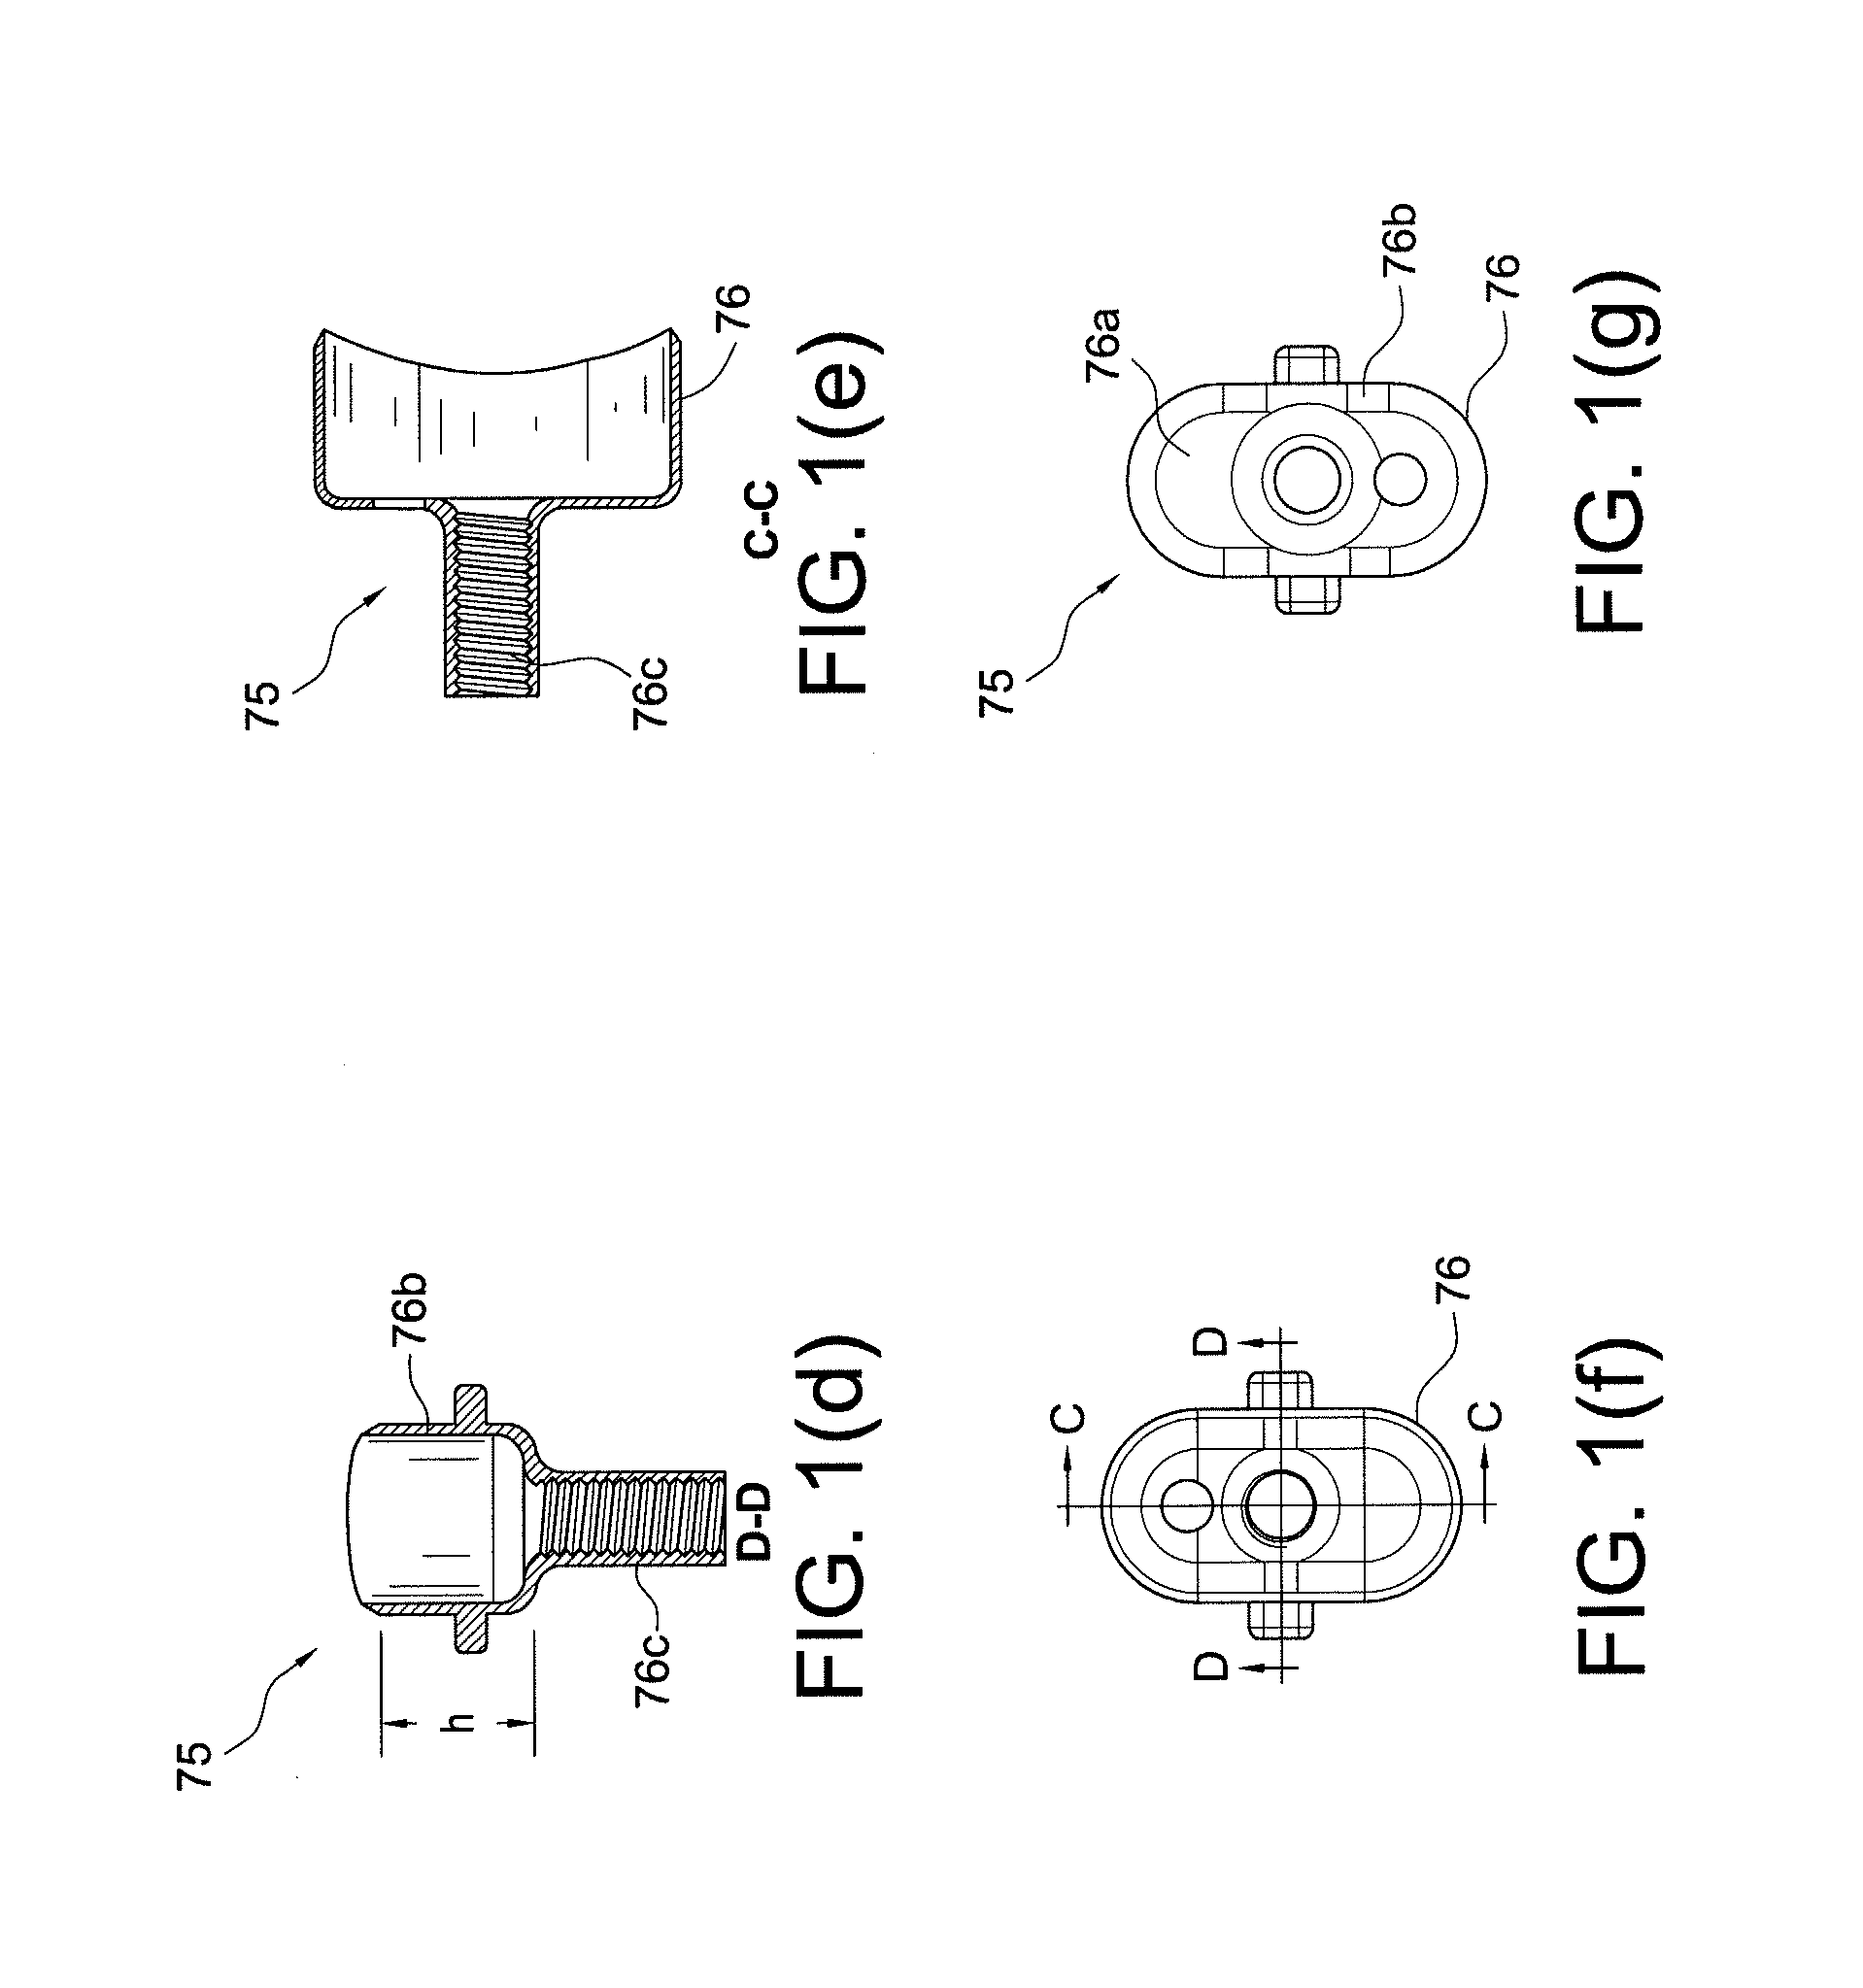 Methods and instruments for forming non-circular cartilage grafts